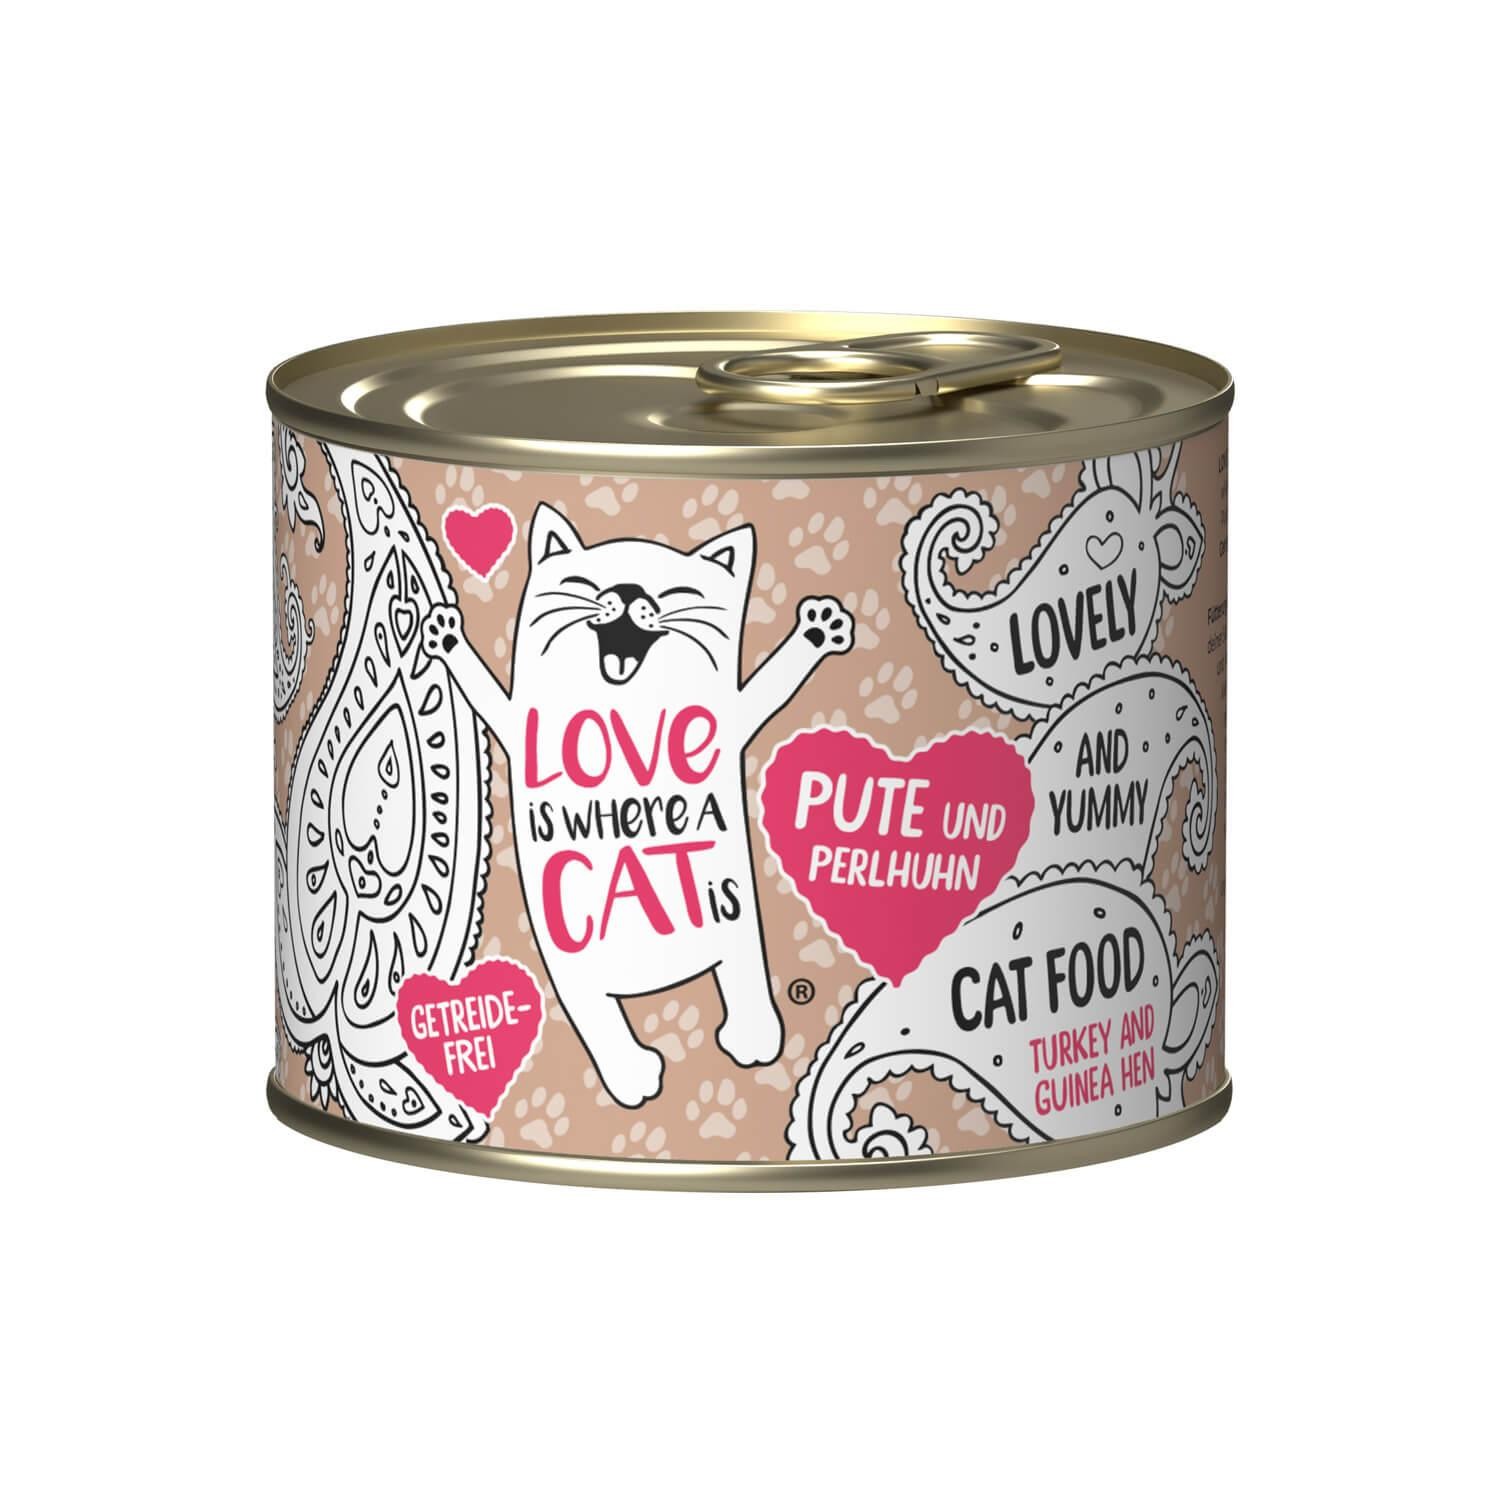 LOVE IS WHERE A CAT IS® 1x200g Pute und Perlhuhn | Probedose